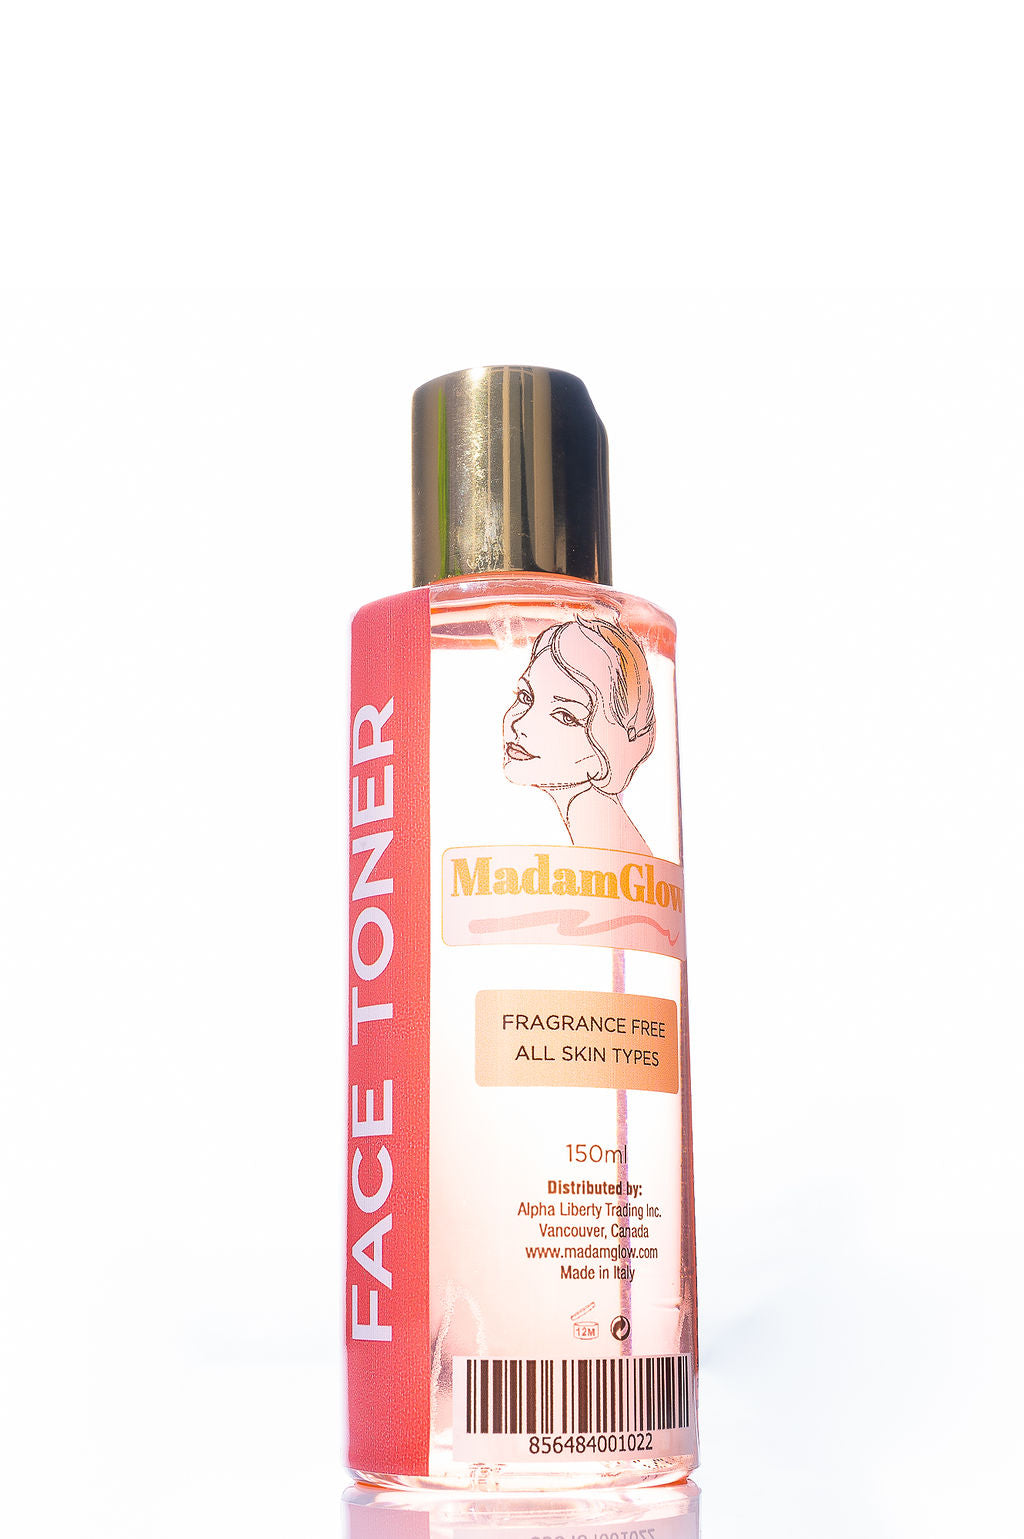 Face toner for skin conditioning  skin perfection makes skin soft radiant. Remove dullness